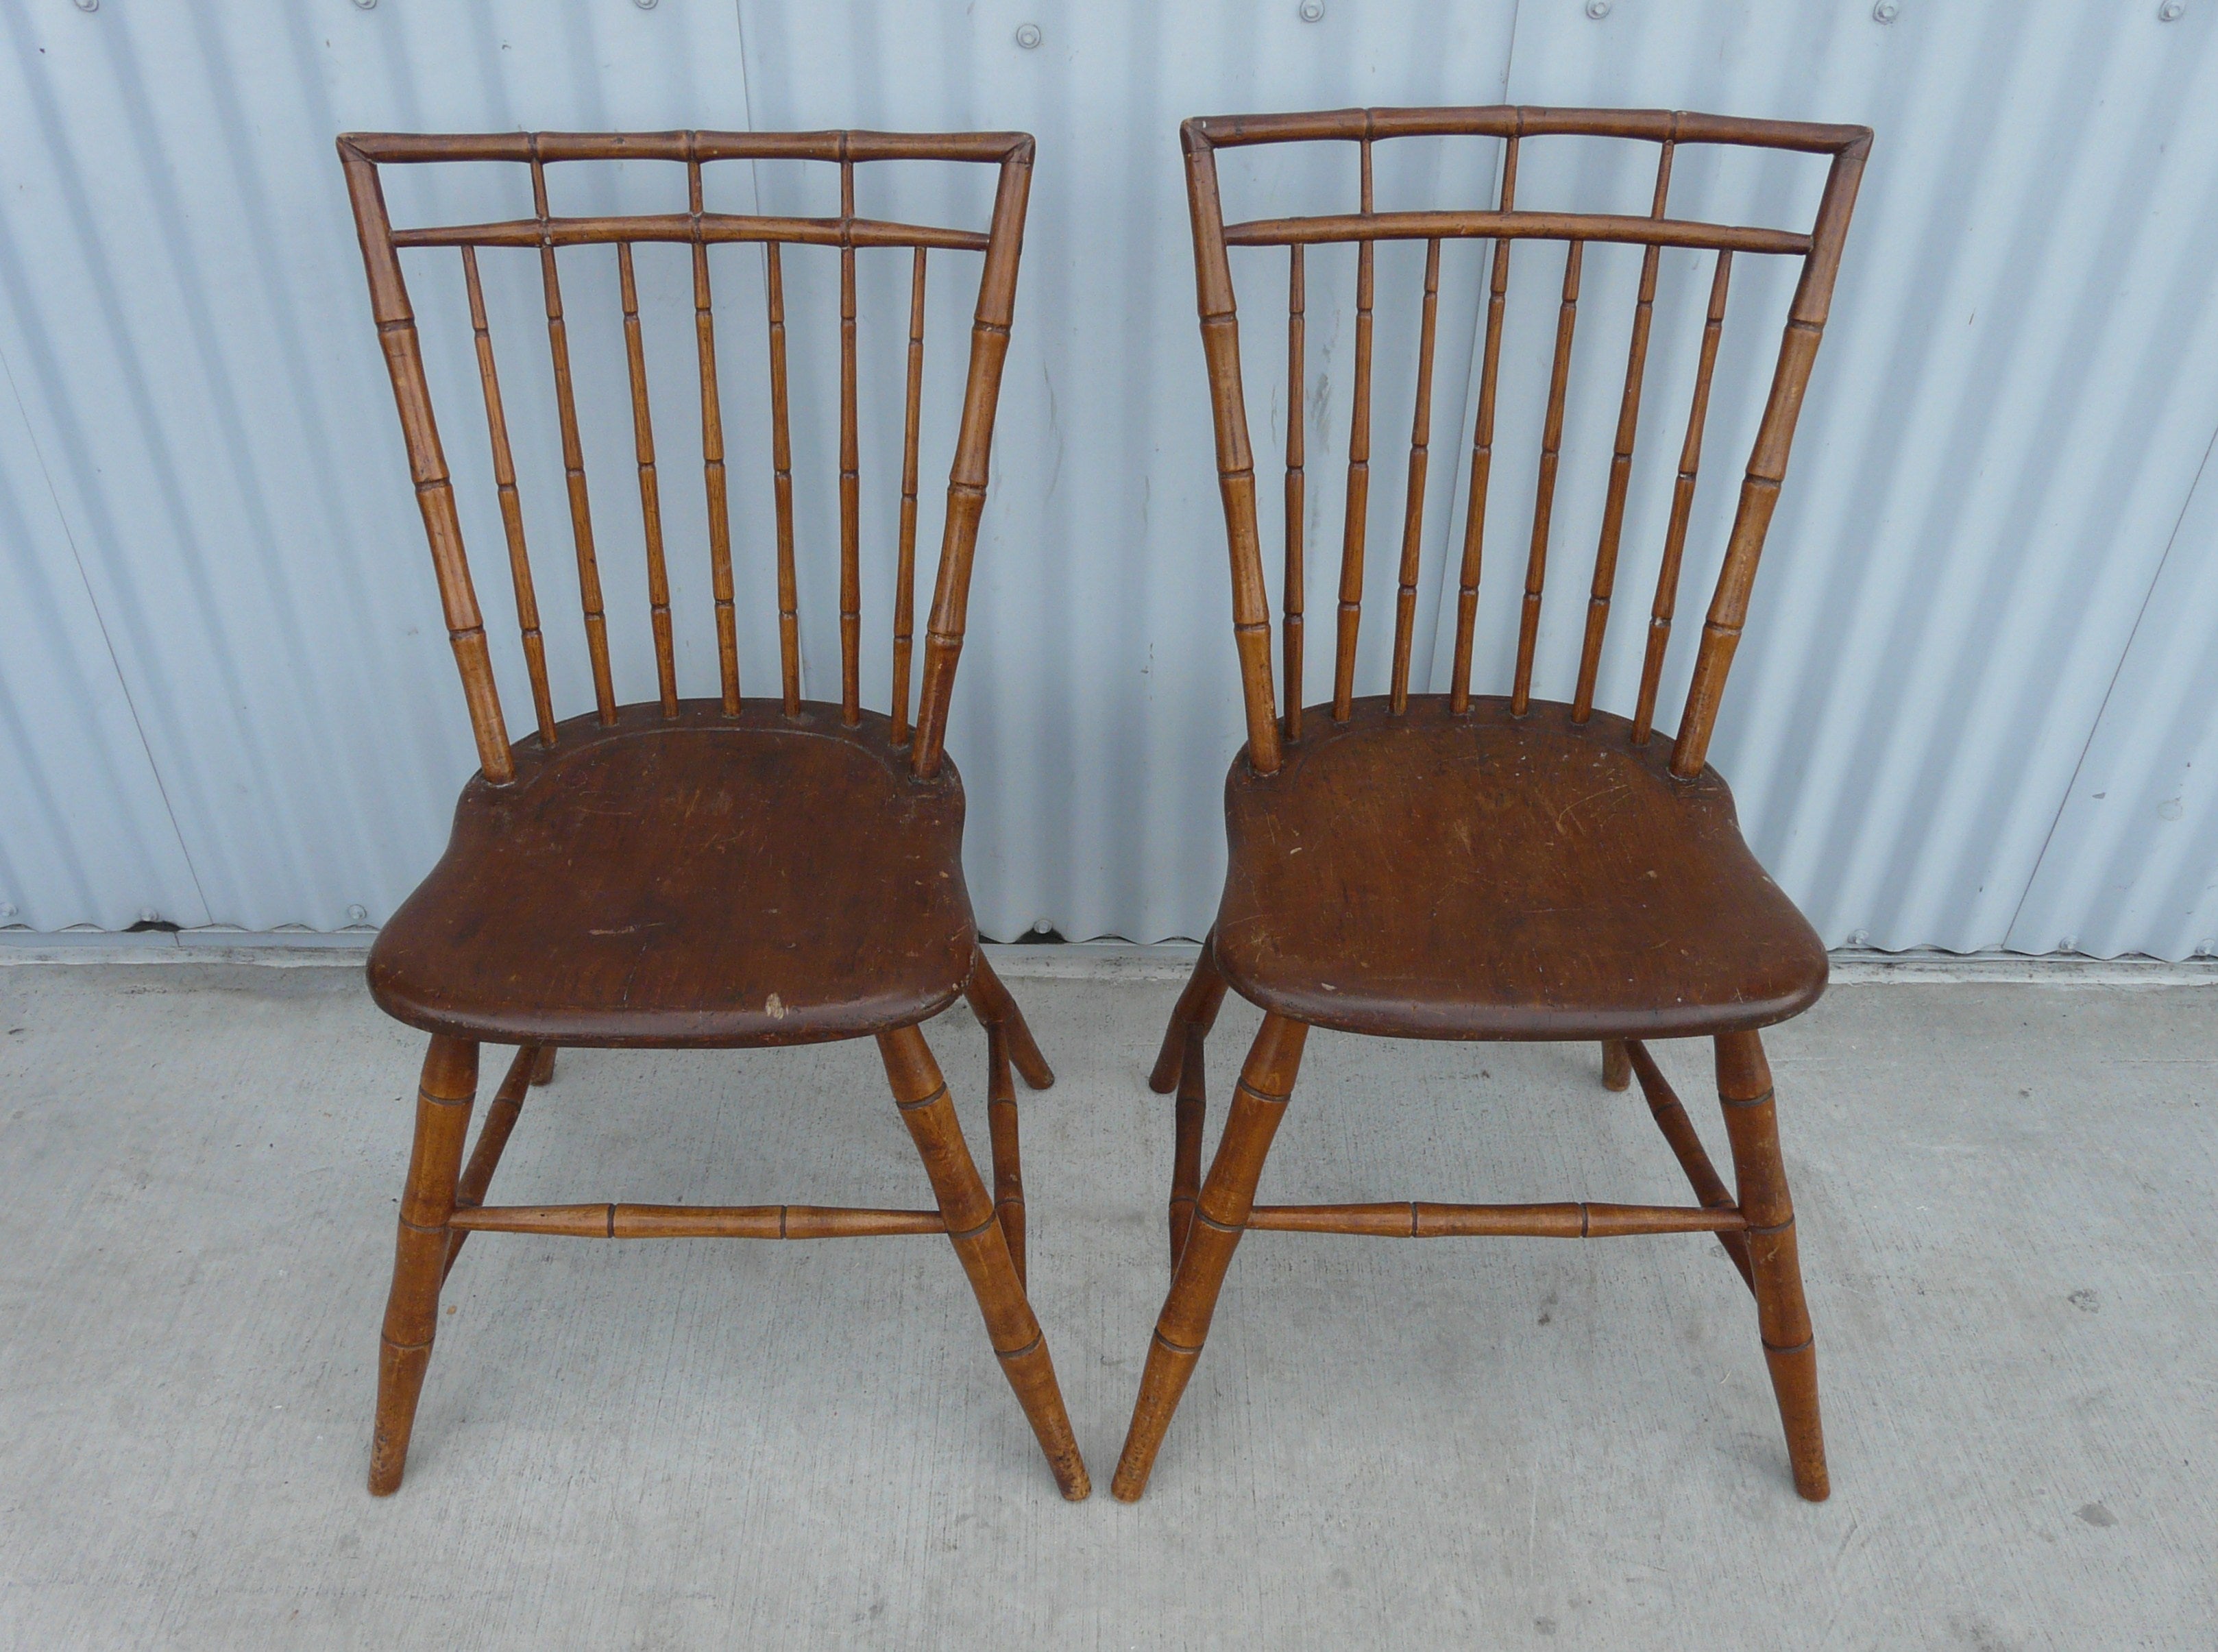 Pair Early American Birdcage Windsor Chairs For Sale